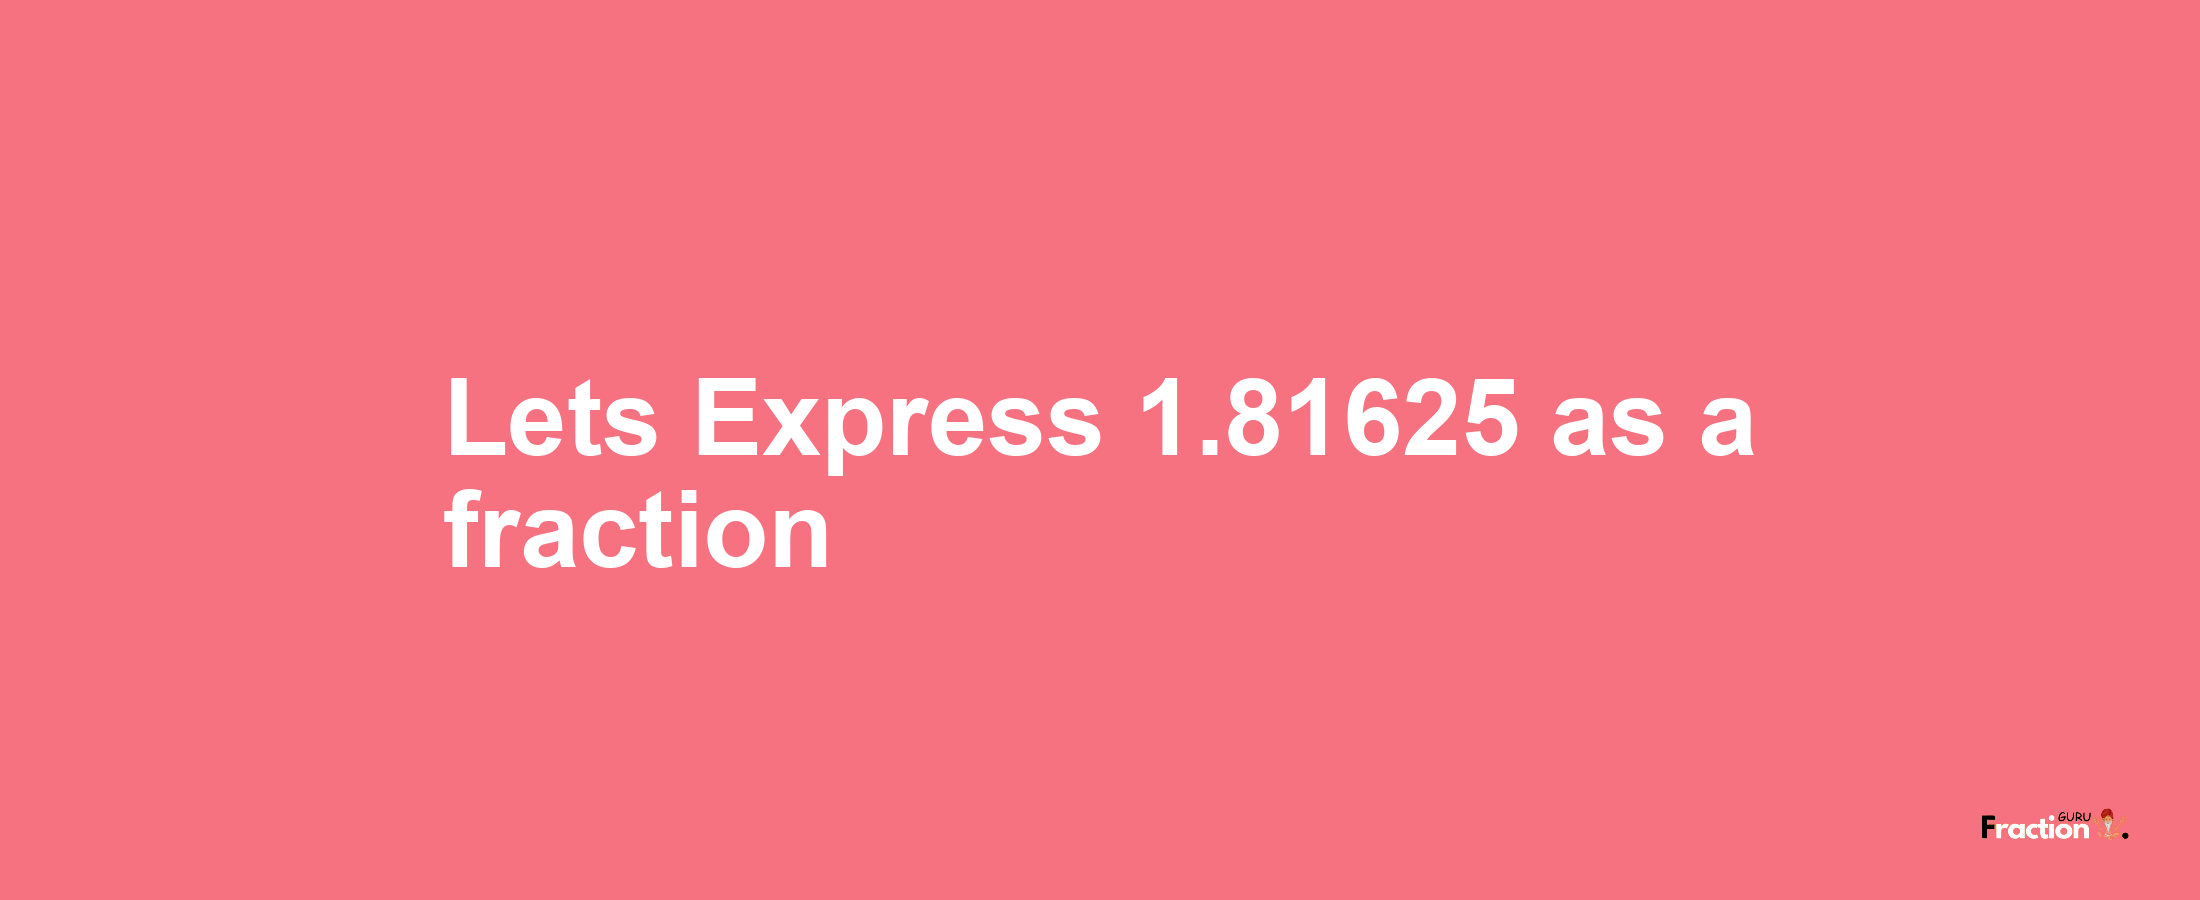 Lets Express 1.81625 as afraction